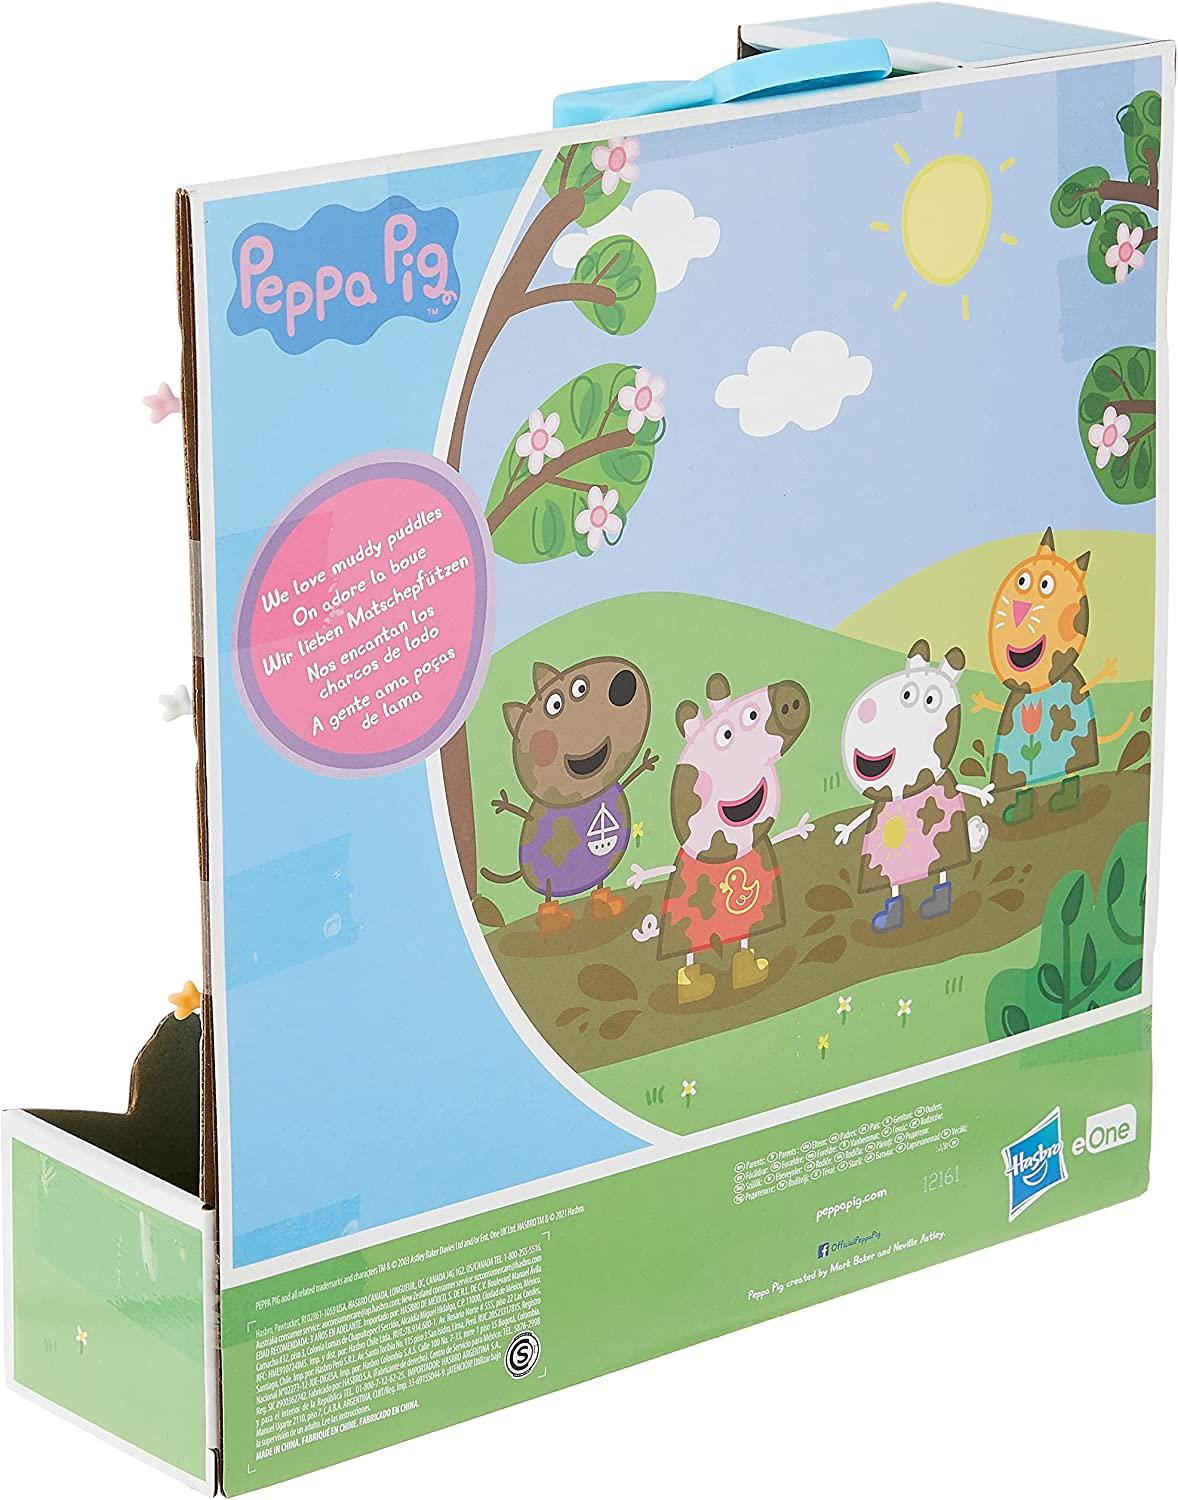 Peppa Pig Peppa's Adventure Carry Along Case Toy by Peppa Pig - UKBuyZone